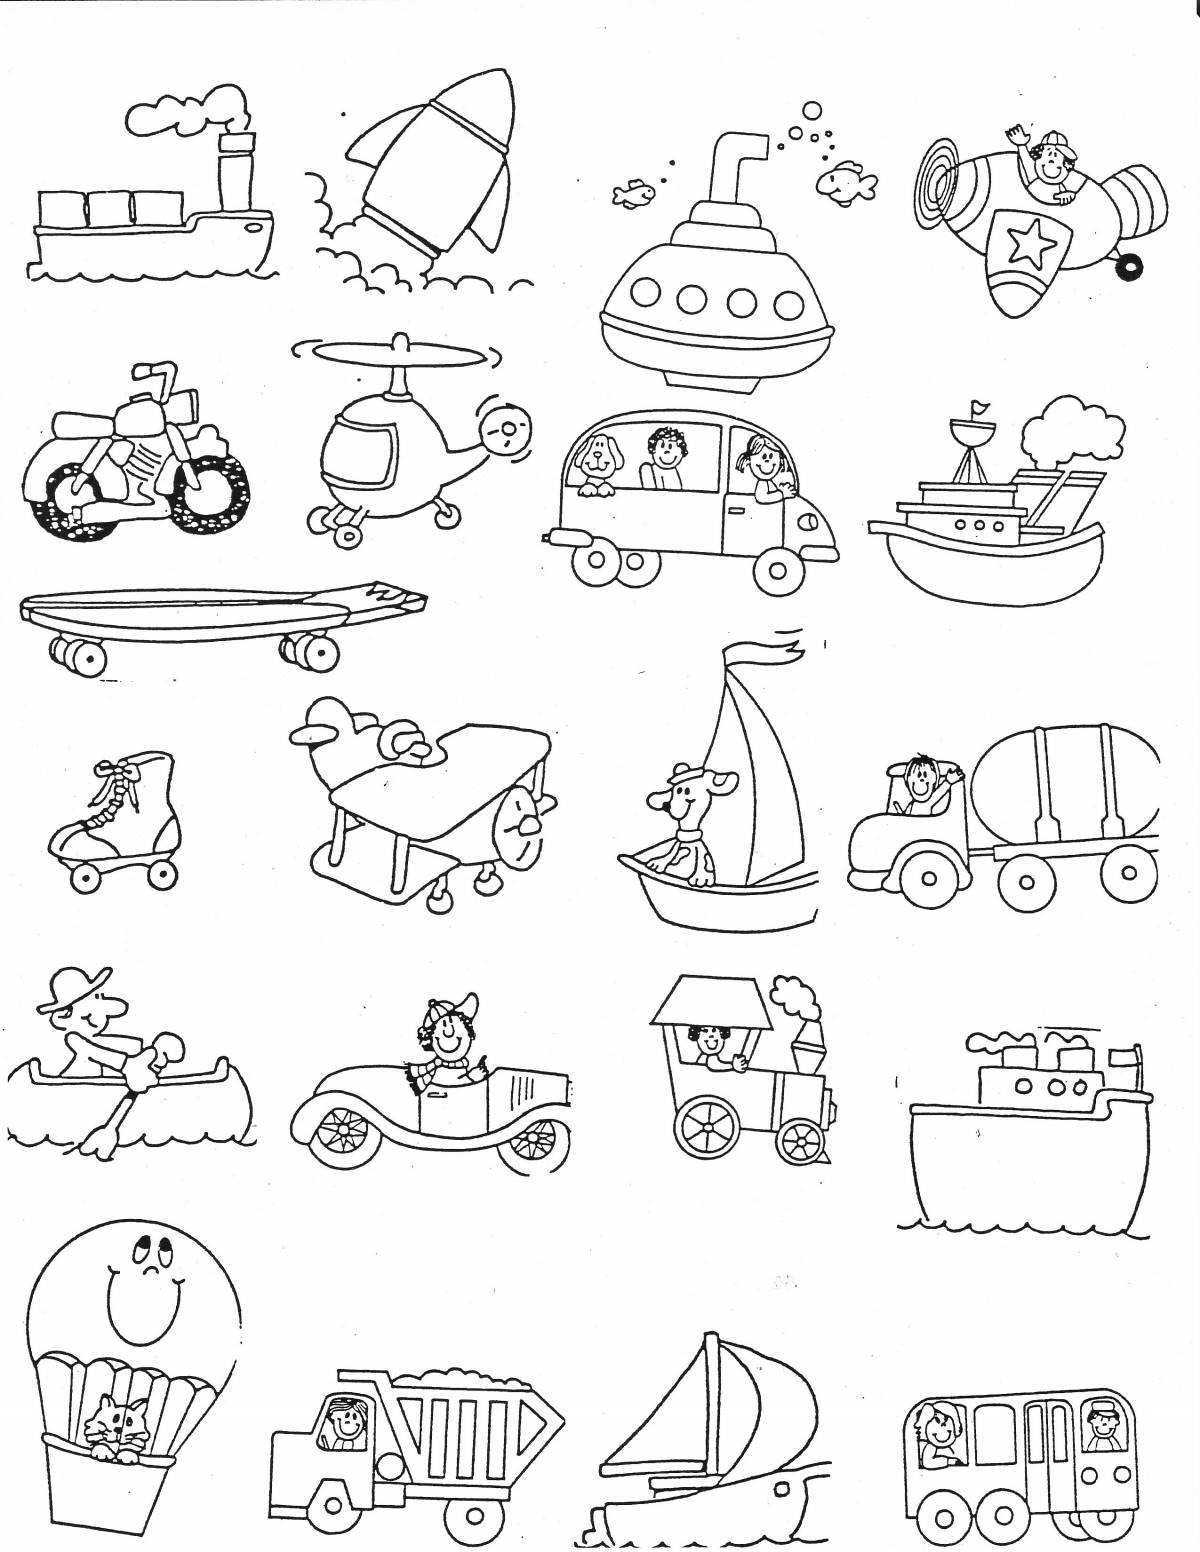 Creative transport coloring book for kids 6-7 years old